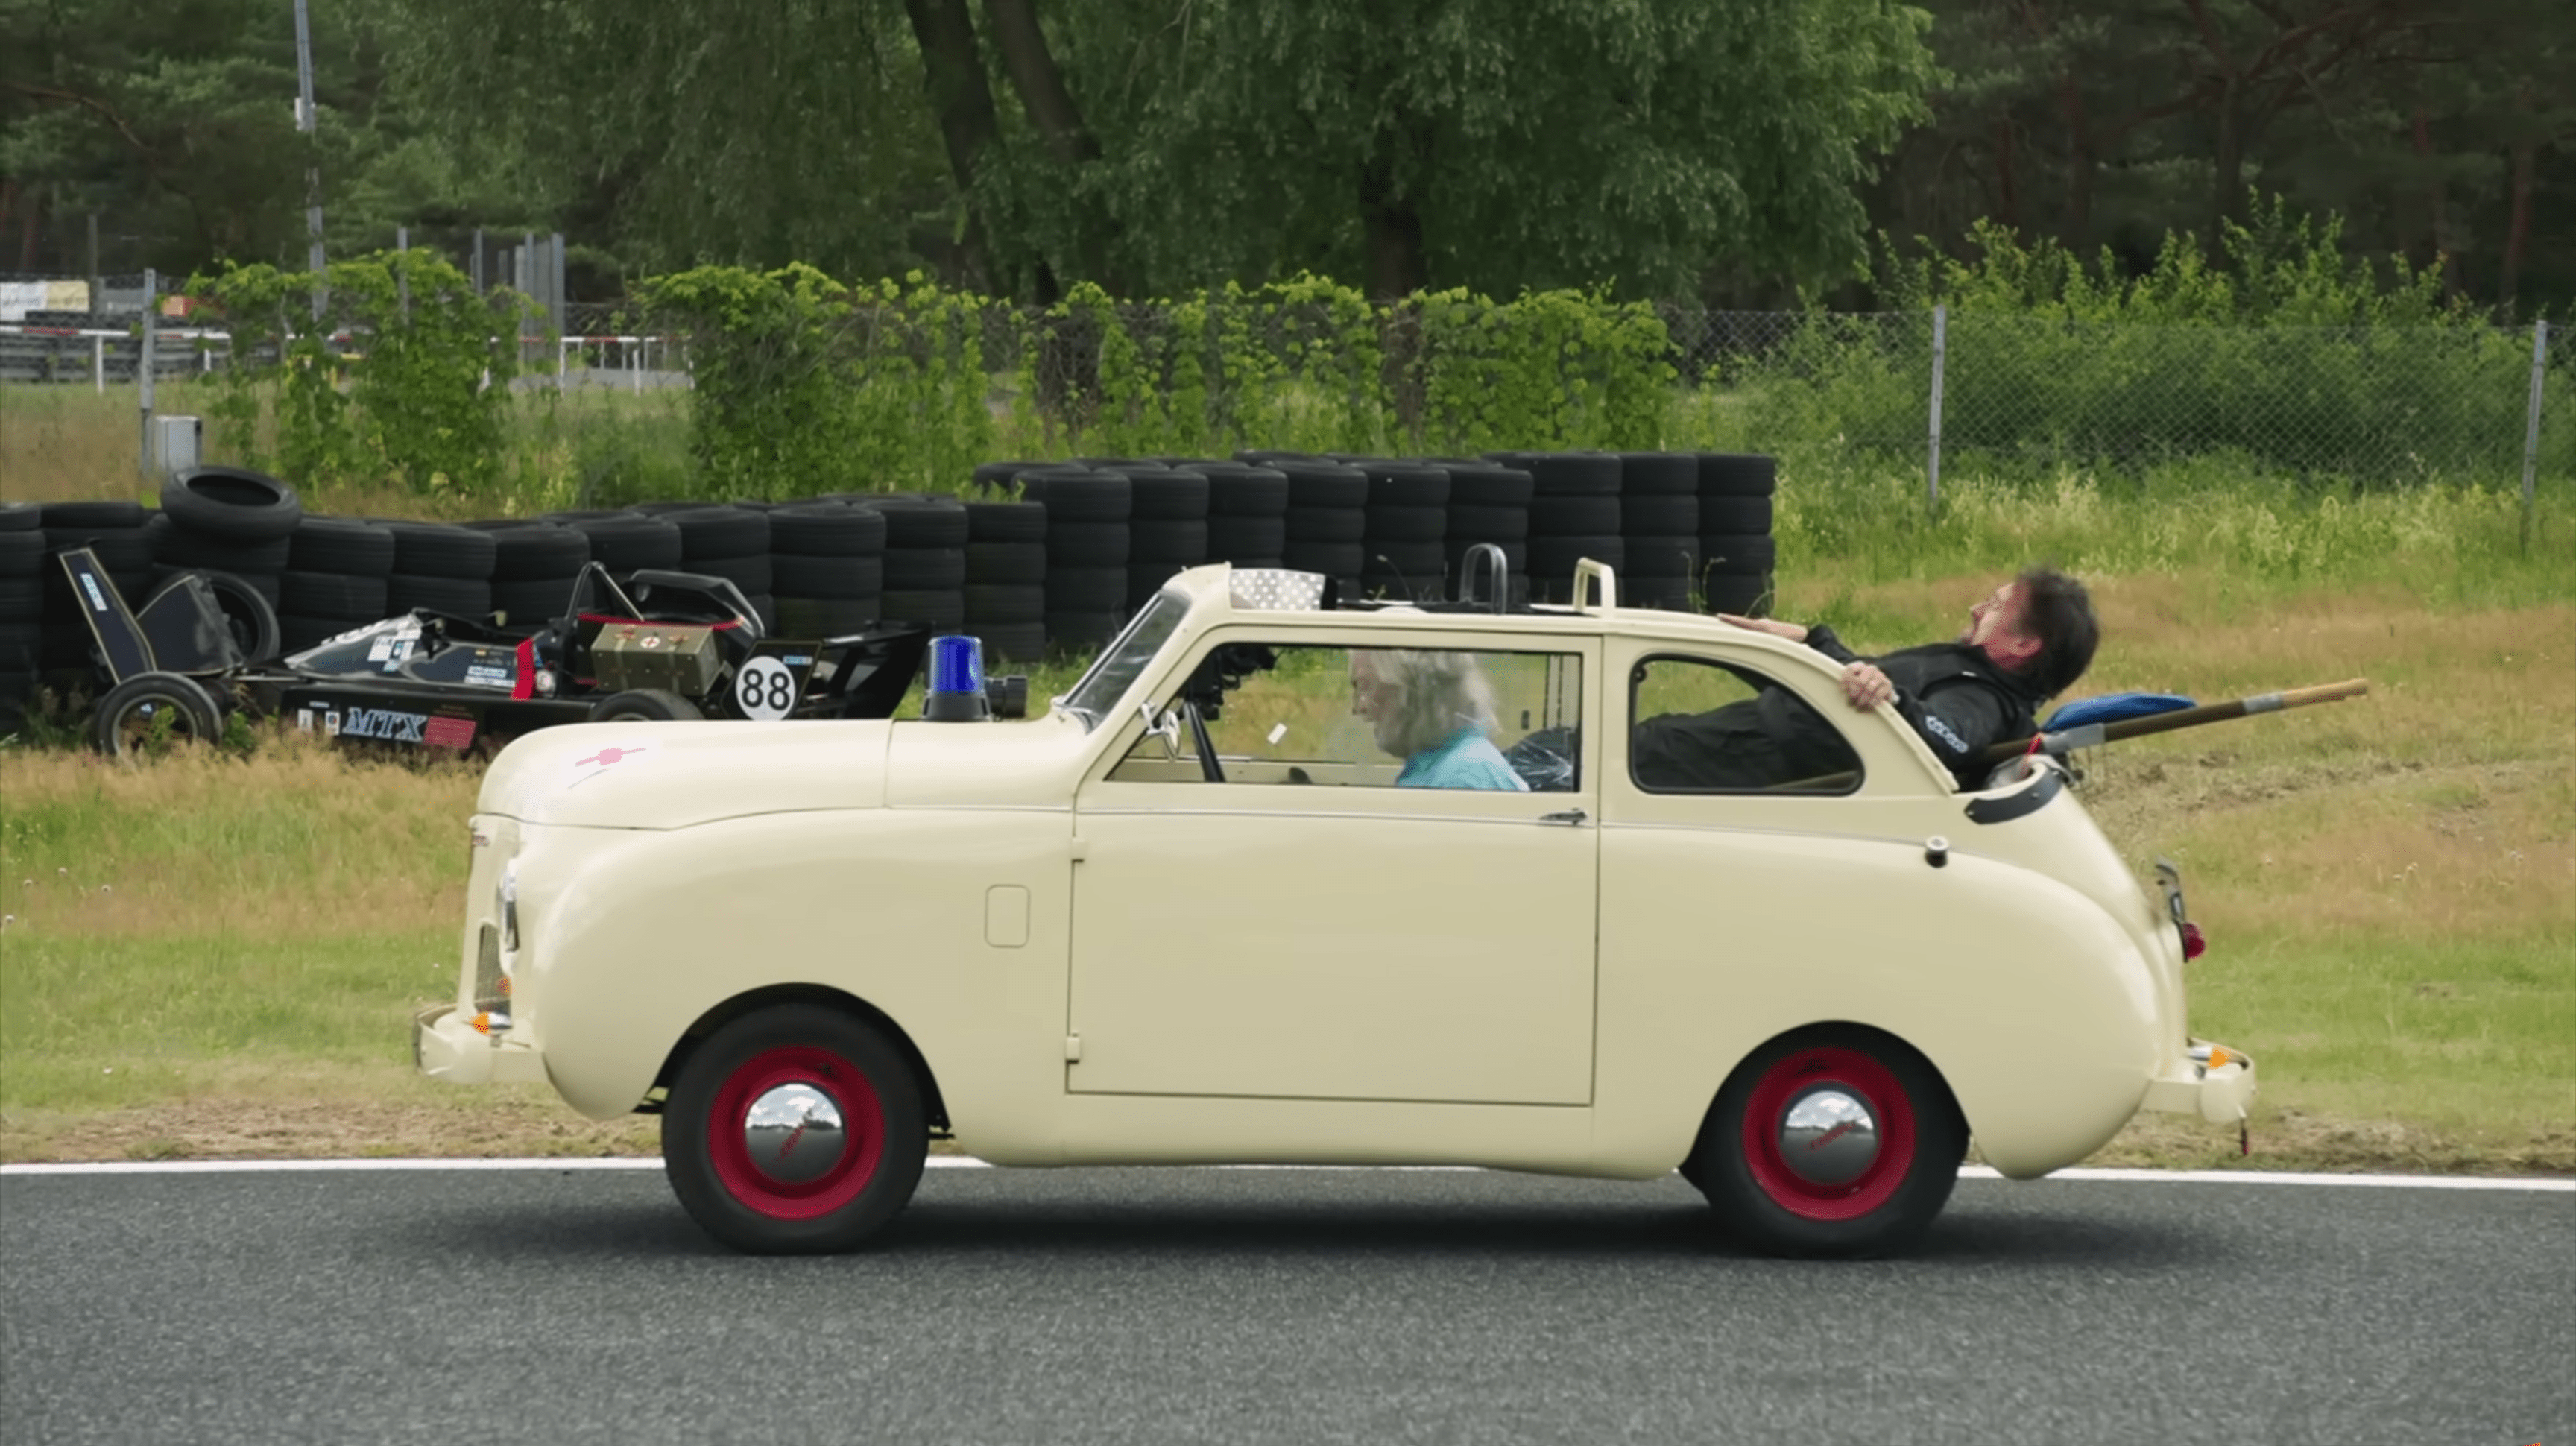 Richard Hammond’s Race Day Ended in James May’s 1947 Ambulance (He’s Fine)